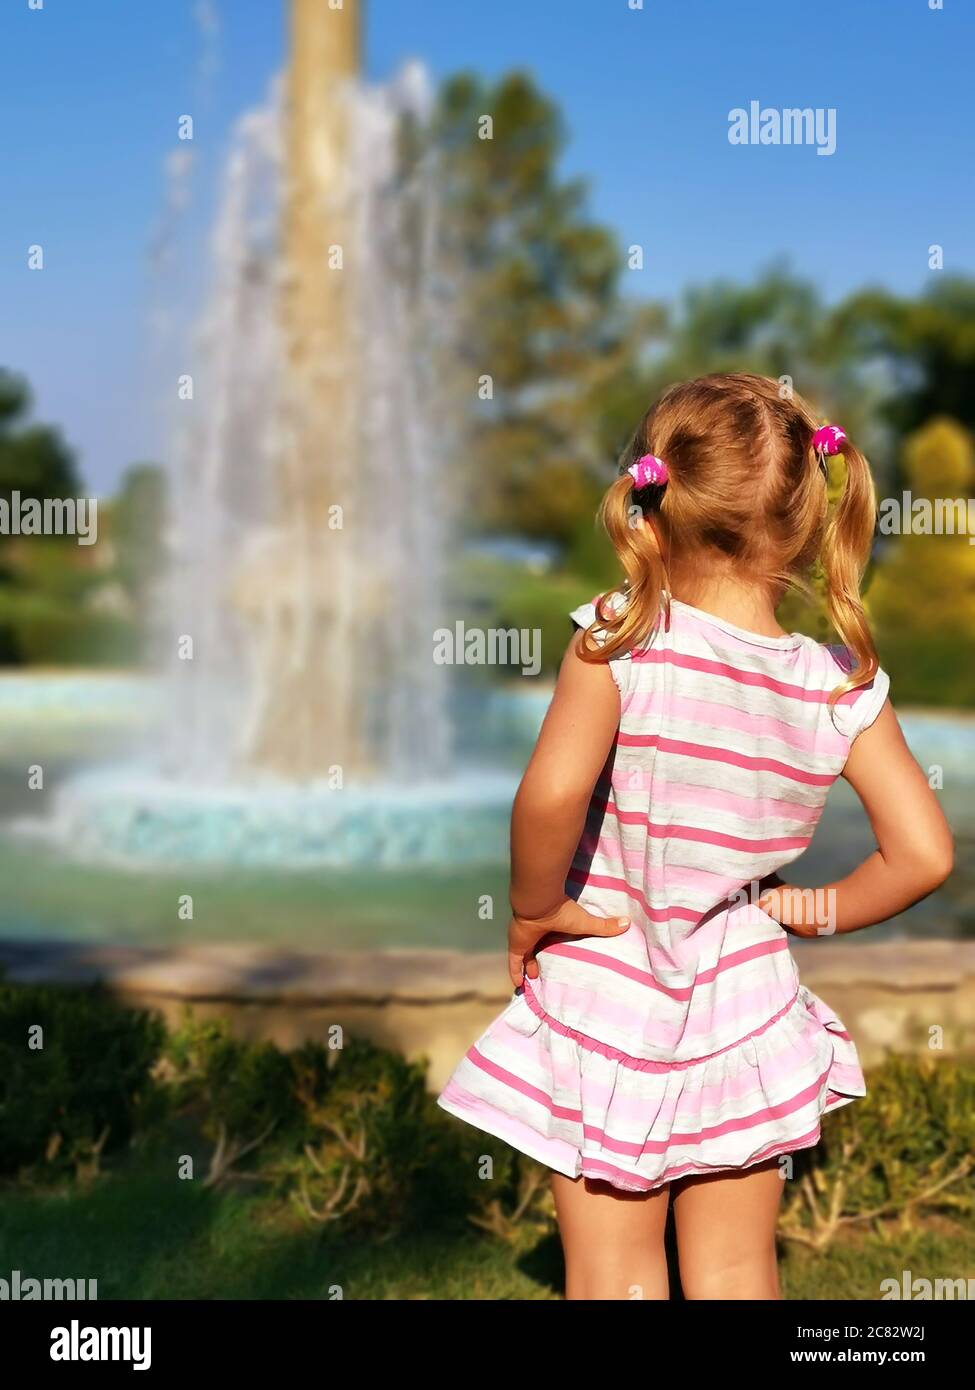 Preschooler little girl watching fountain rear view. Young female child enjoy being outside in summertime. Curiosity blonde looking at splashing dropl Stock Photo